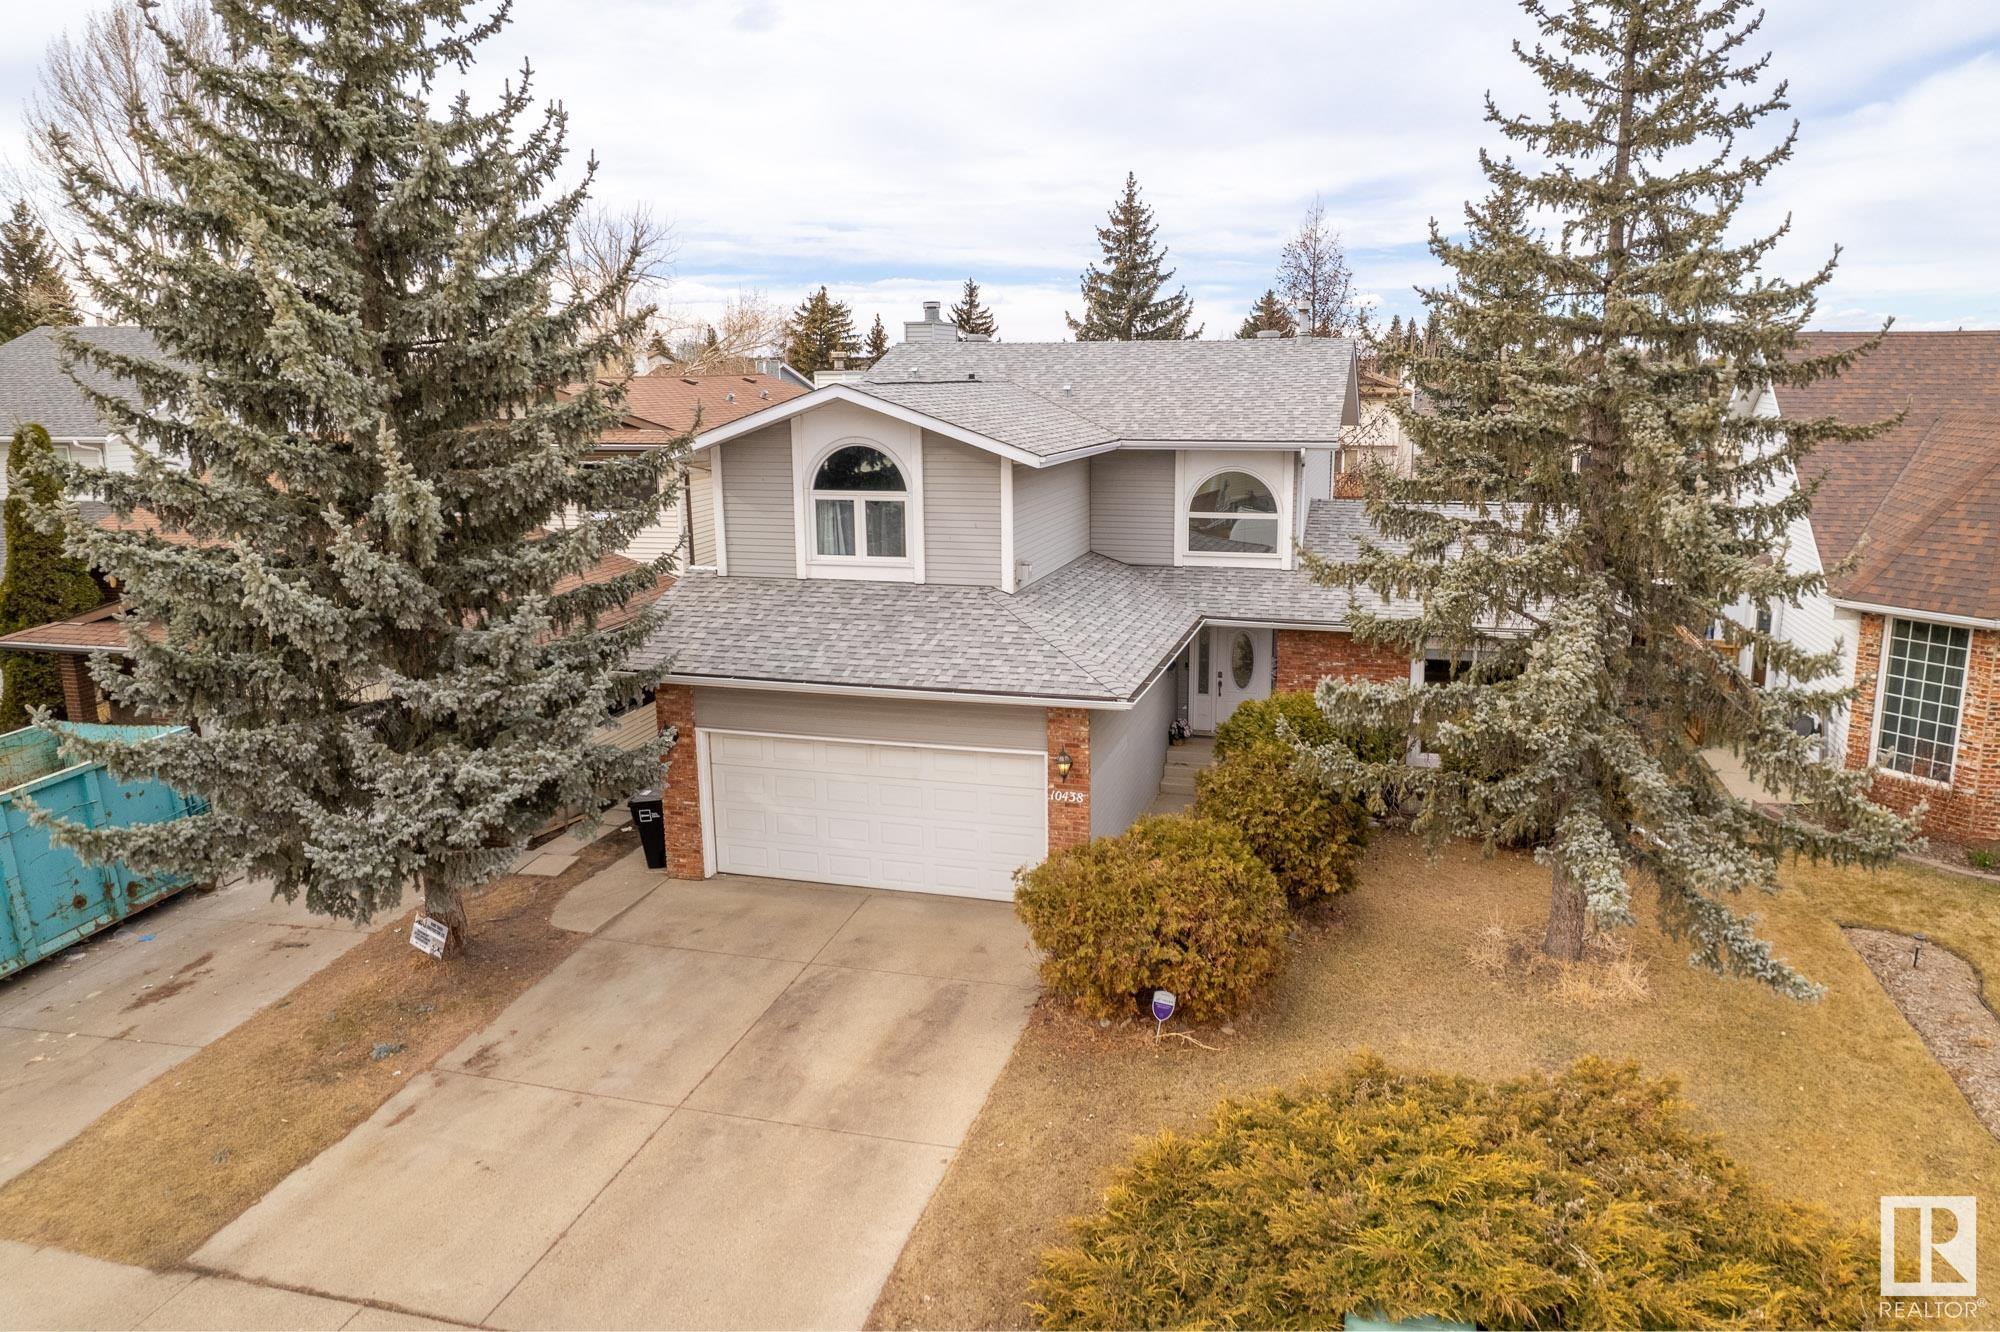 Bearspaw (Edmonton) Detached Single Family for sale:  4 bedroom 2,177.13 sq.ft. (Listed 2106-02-06)